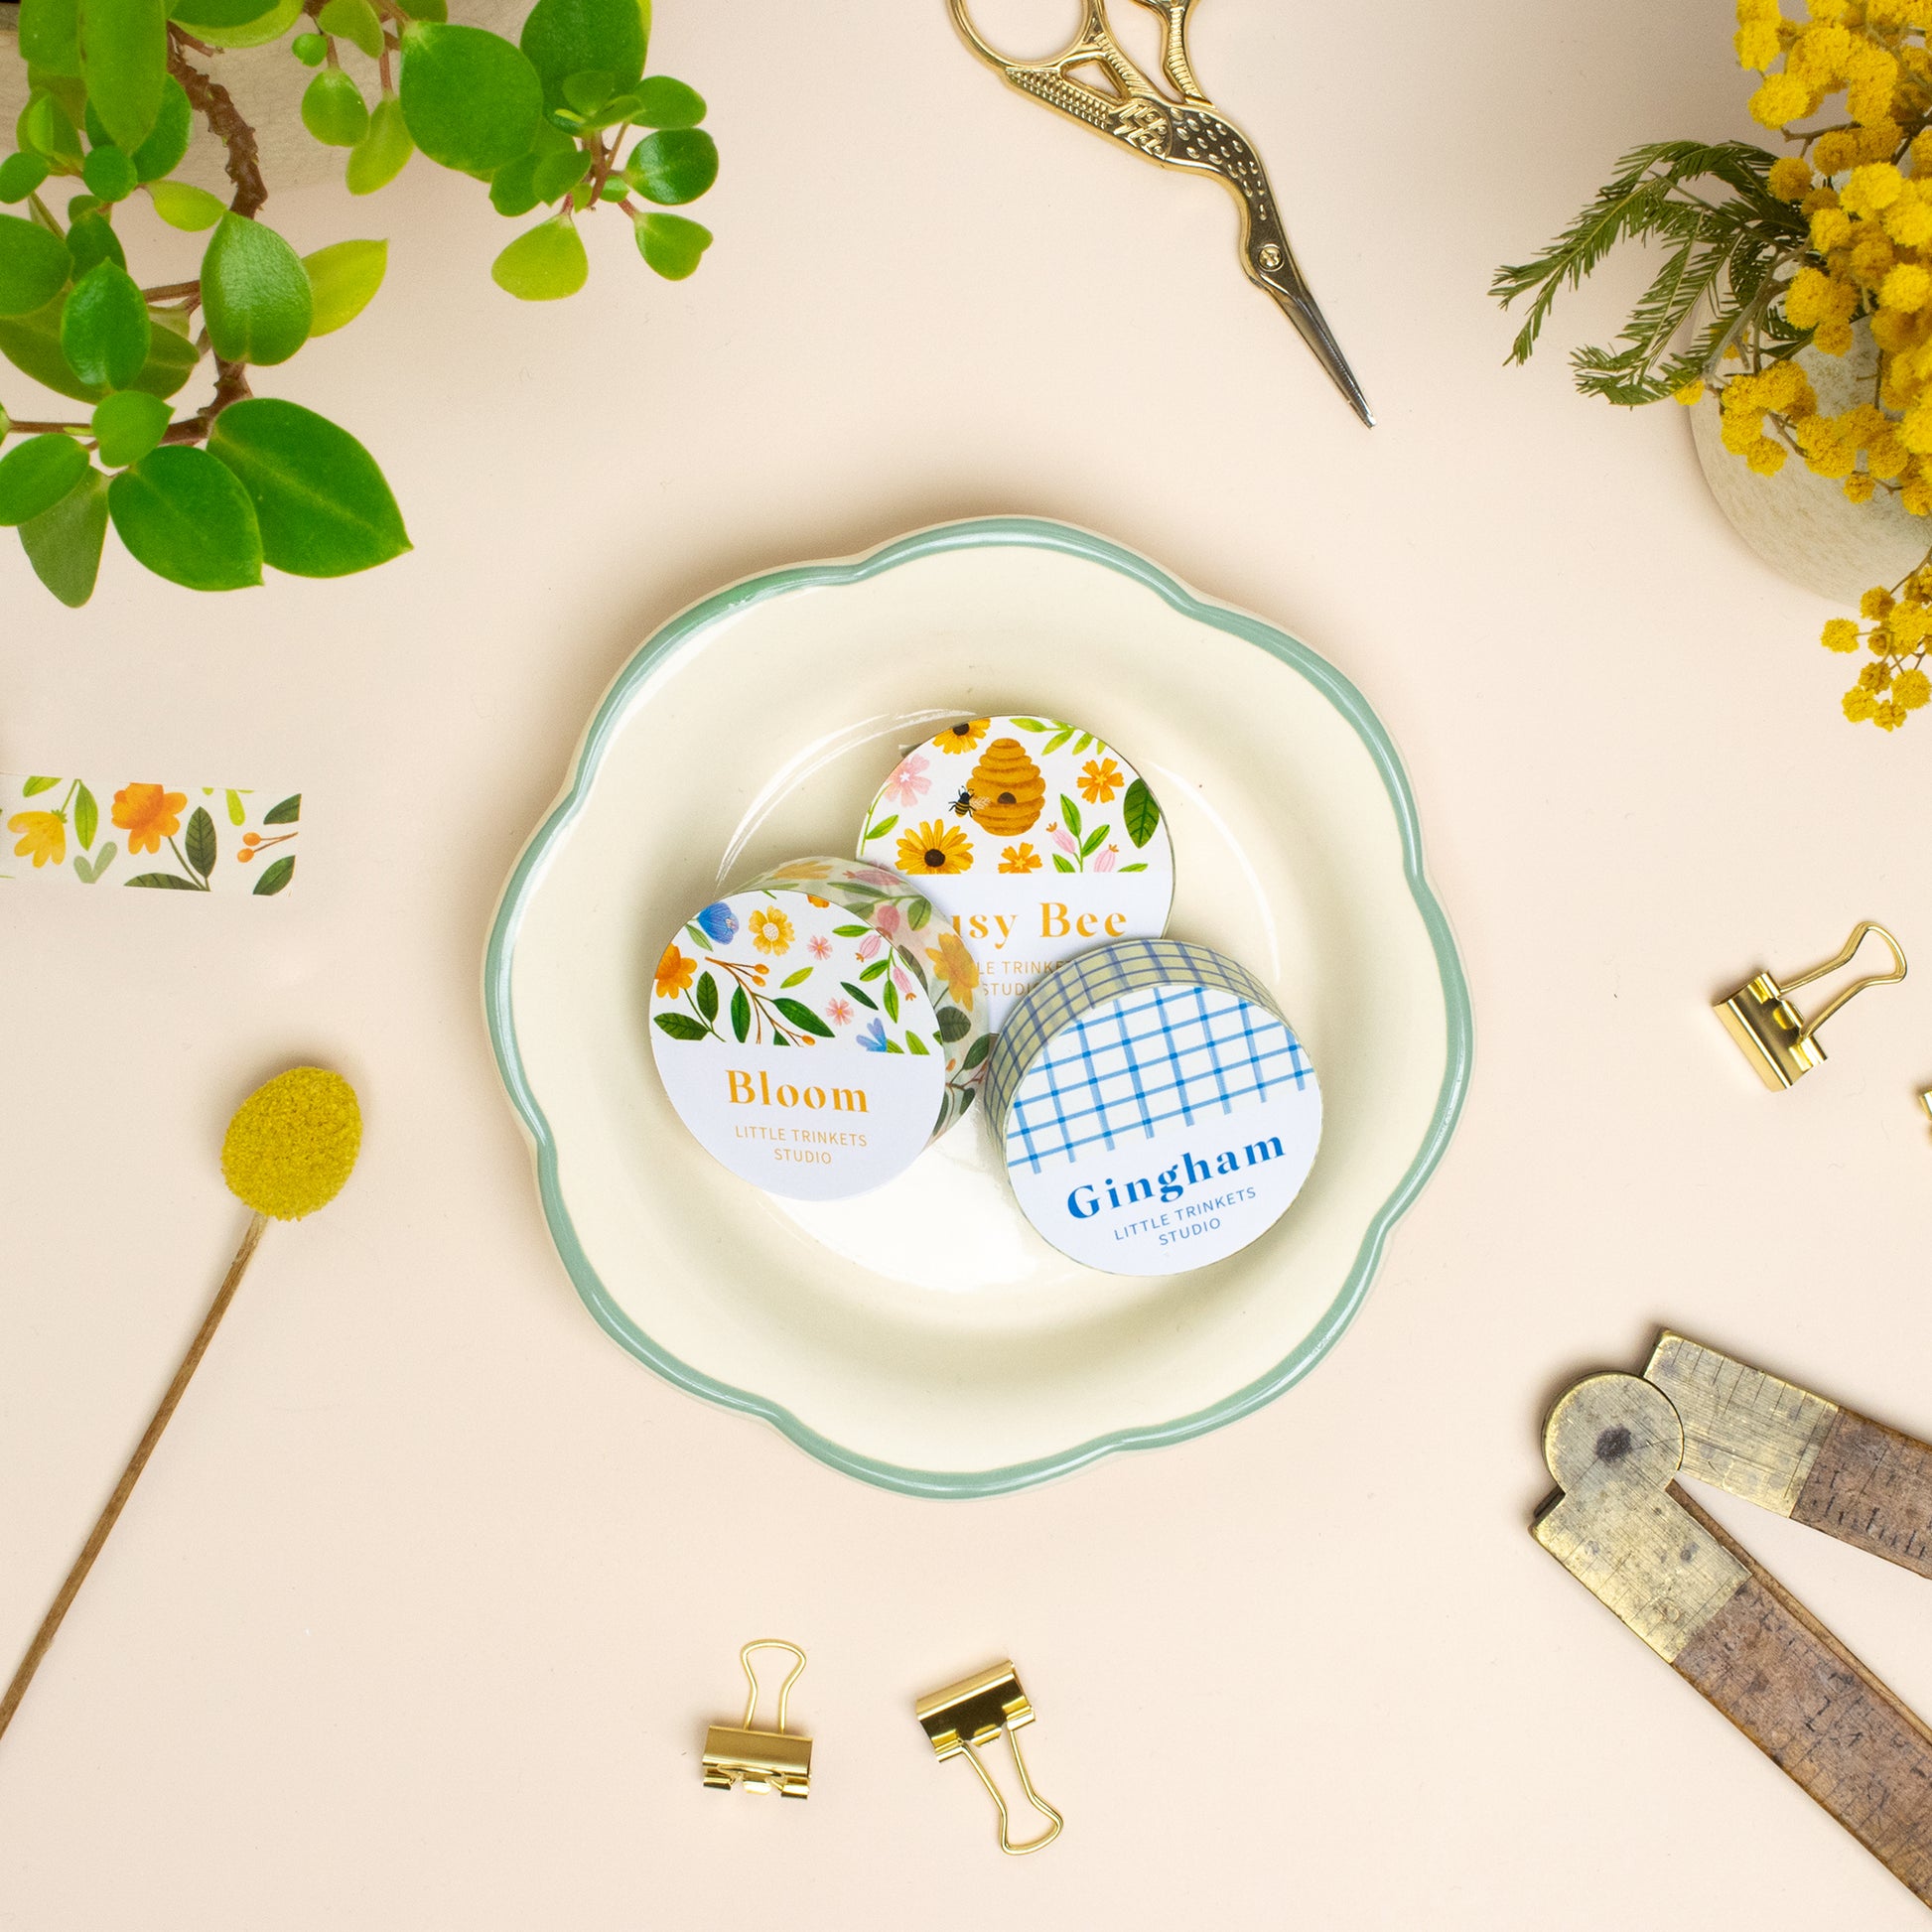 Bee washi tapes in a floral trinket bowl